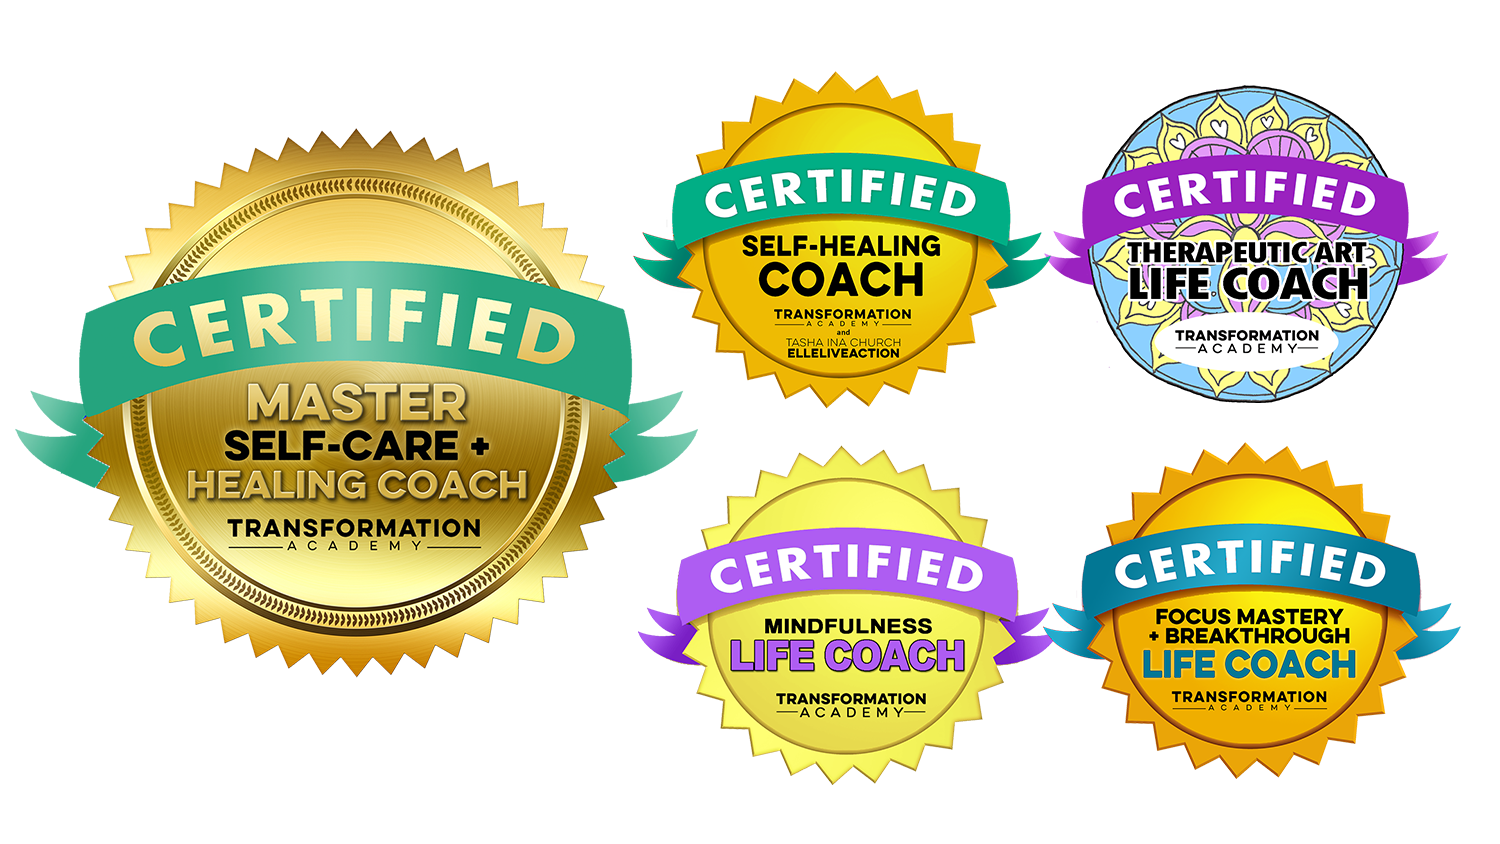 Master Self-Care and Healing Coach Certification